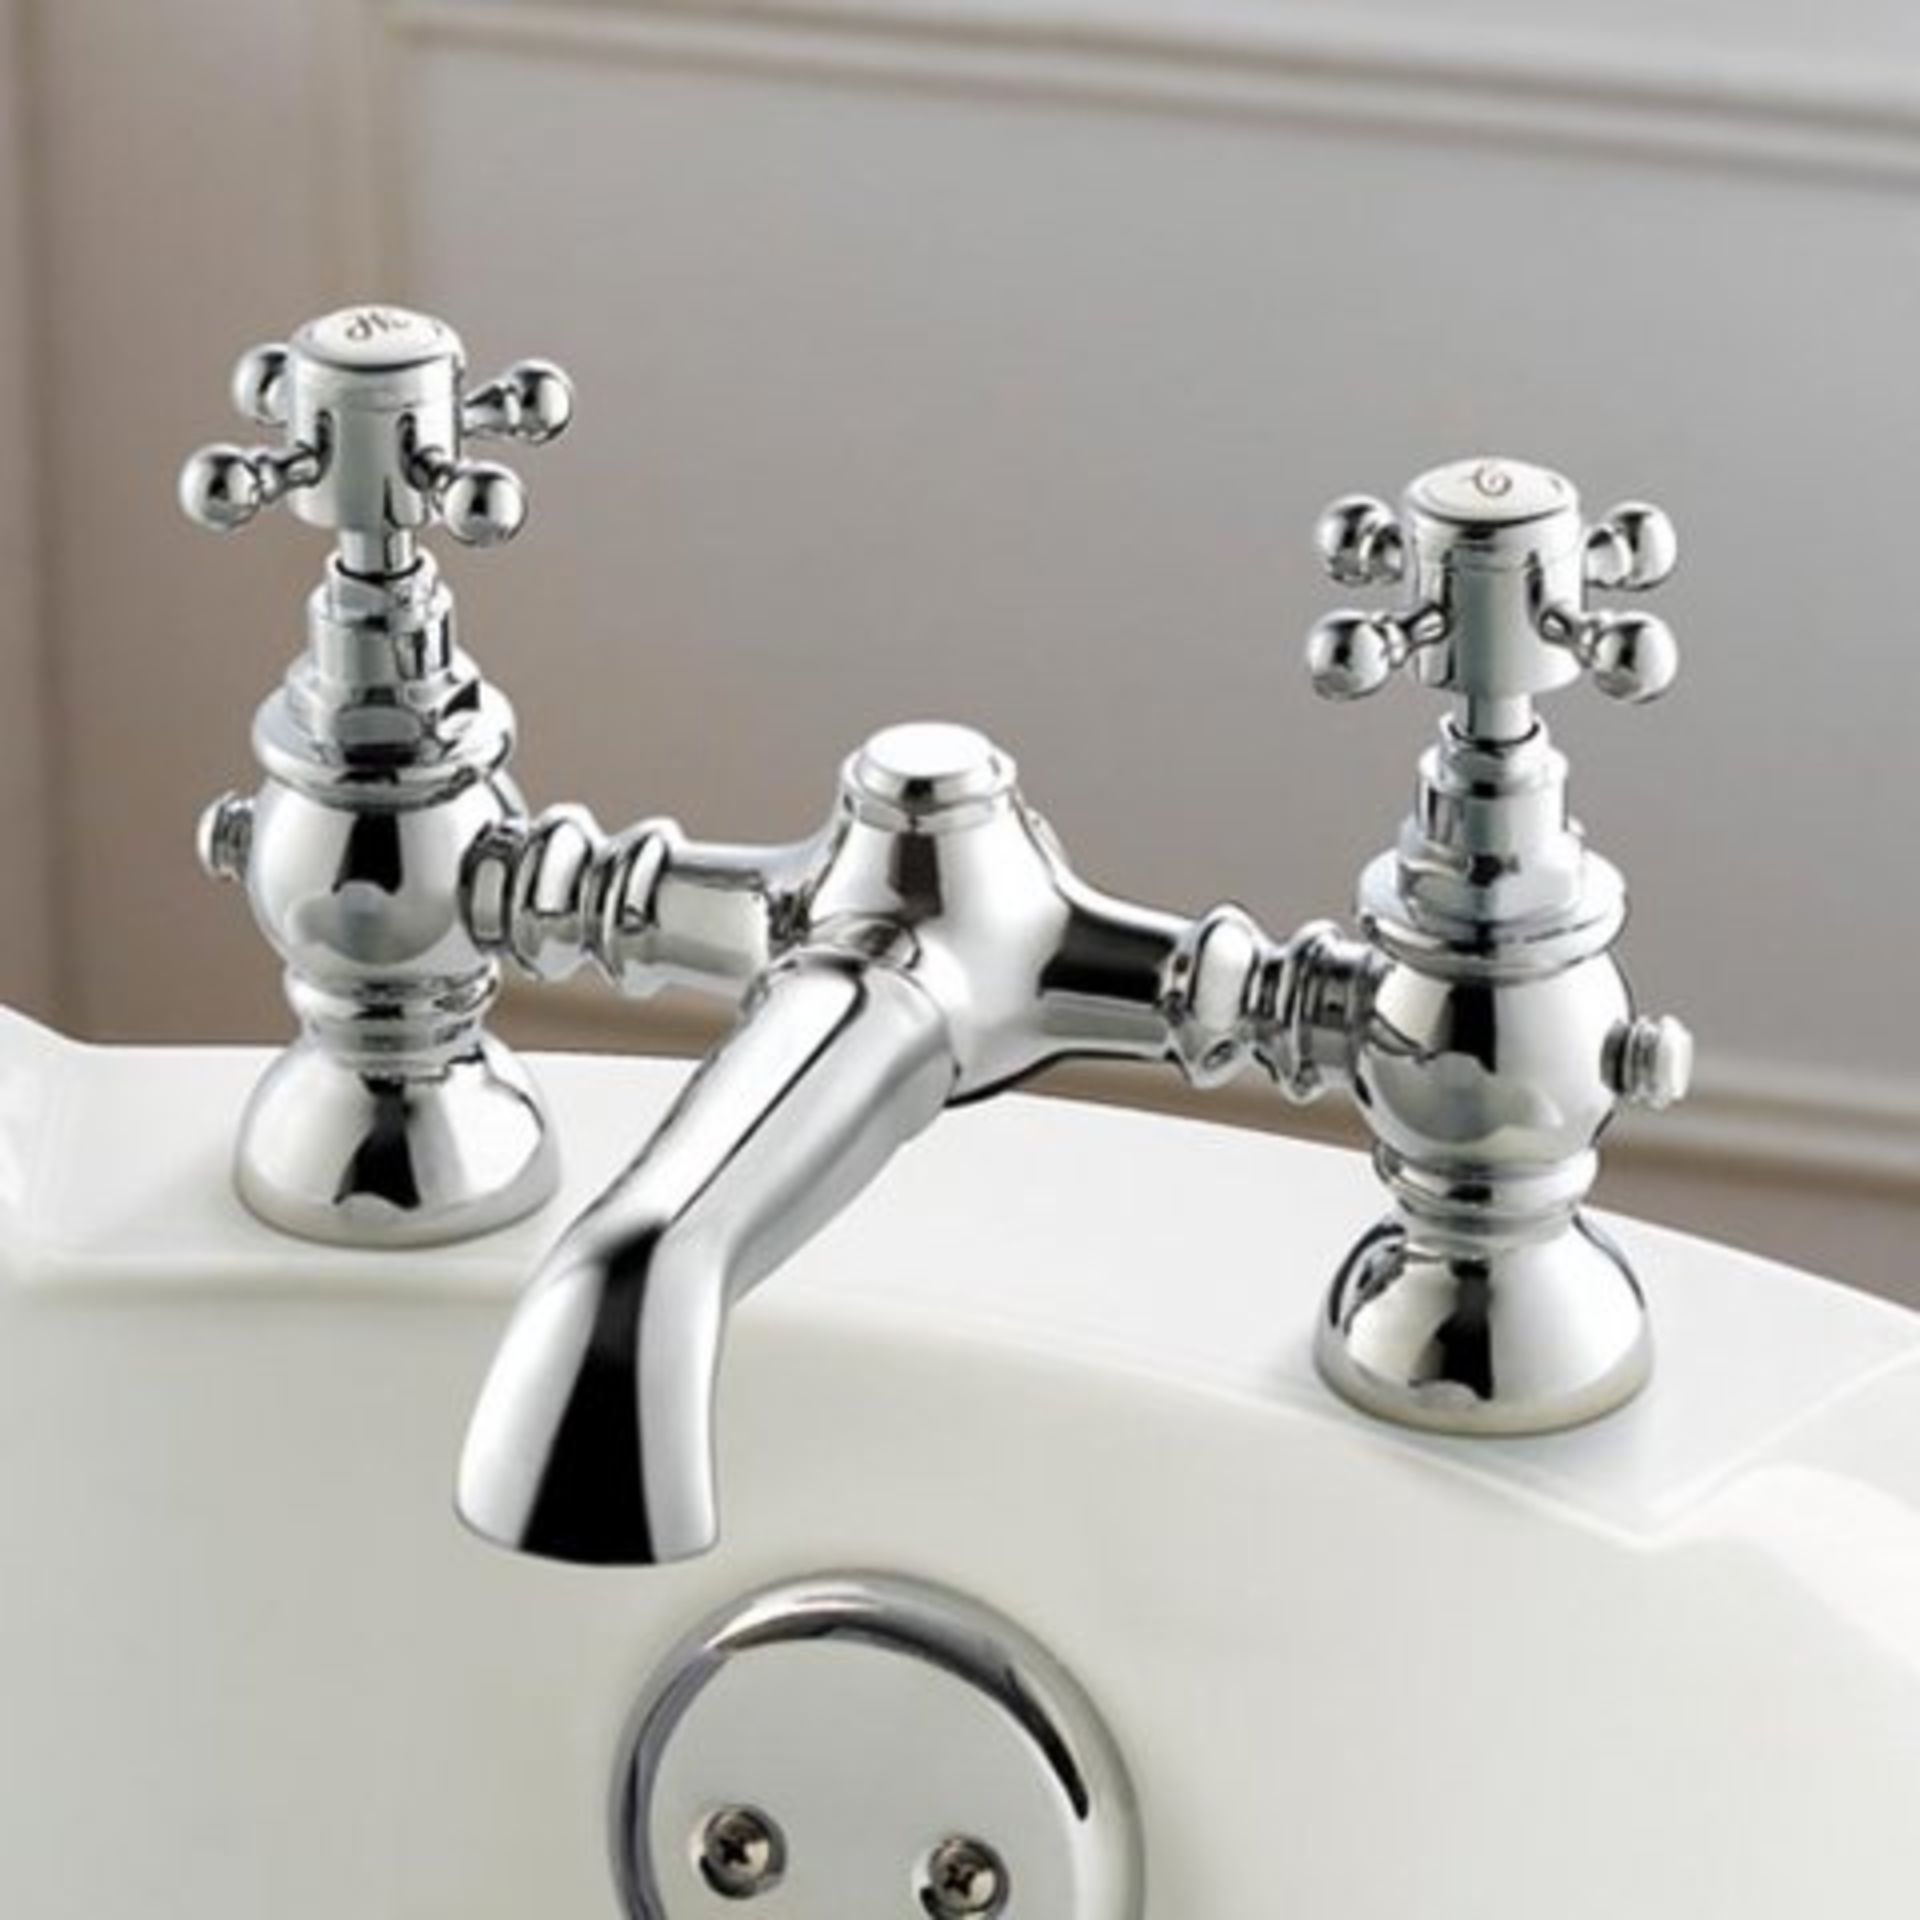 (A553) Victoria II Traditional Bath Mixer Tap. RRP £153.99. Our great range of traditional taps